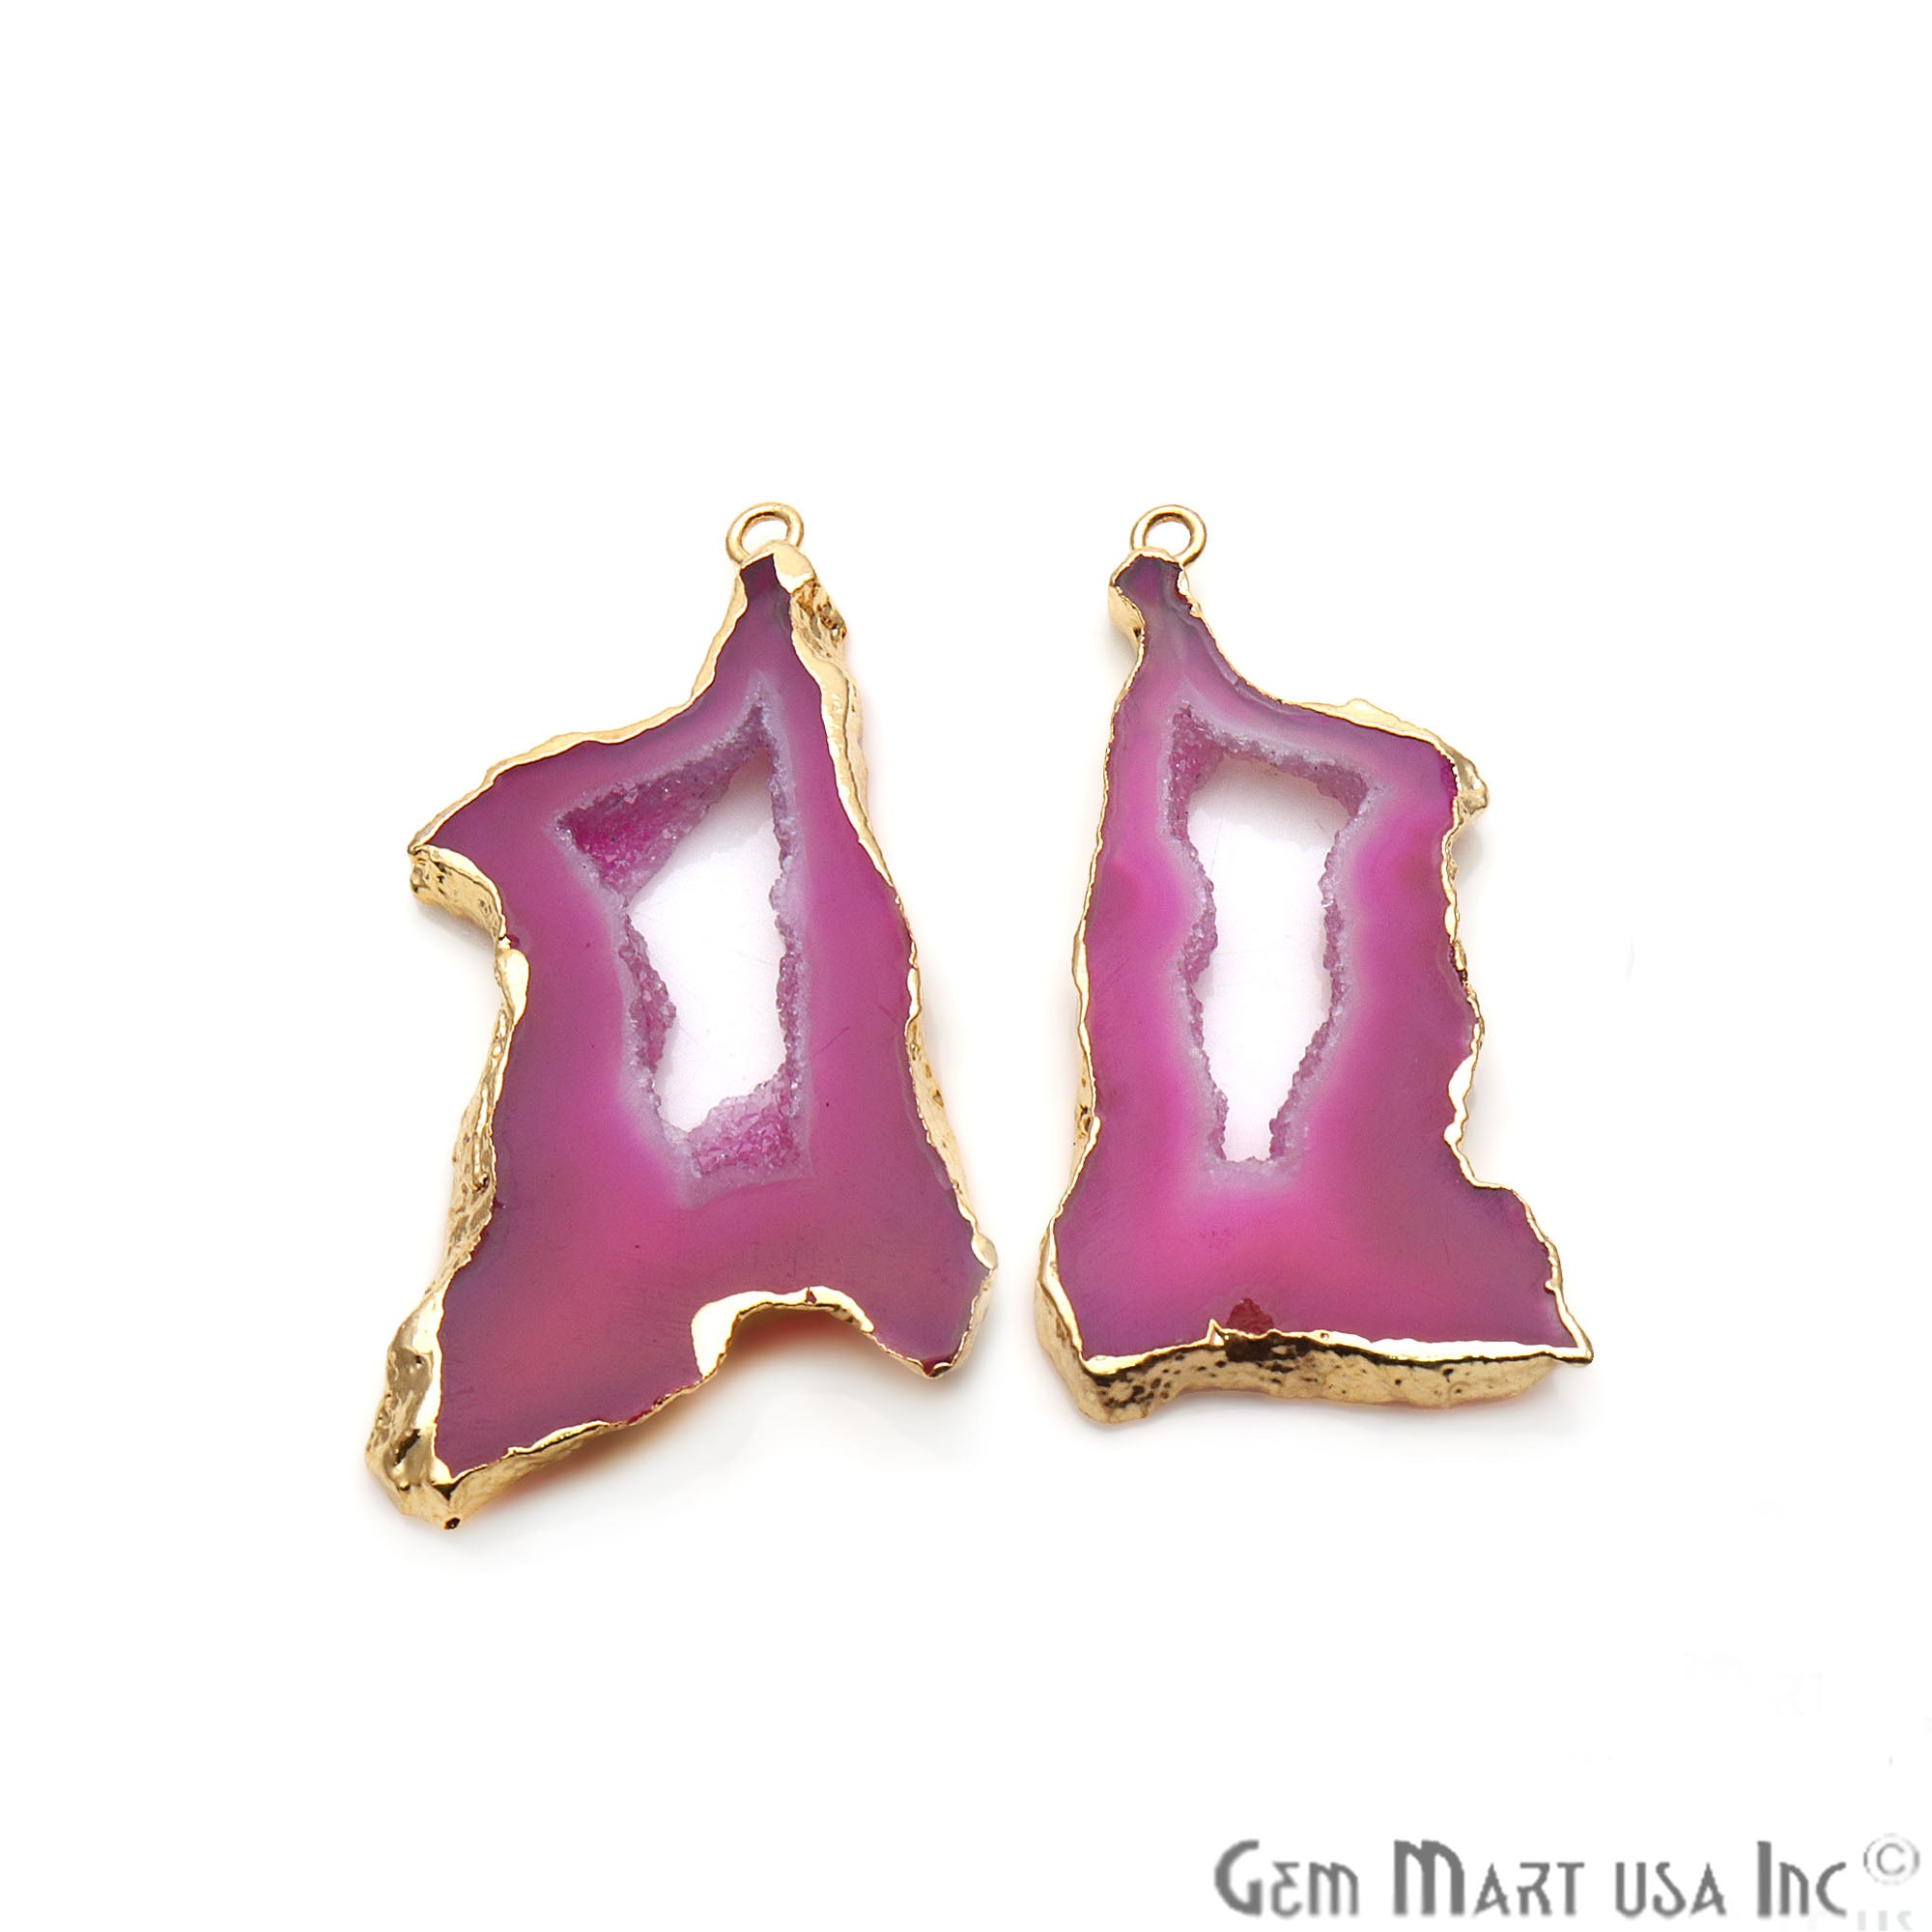 Agate Slice 52x27mm Organic Gold Electroplated Gemstone Earring Connector 1 Pair - GemMartUSA